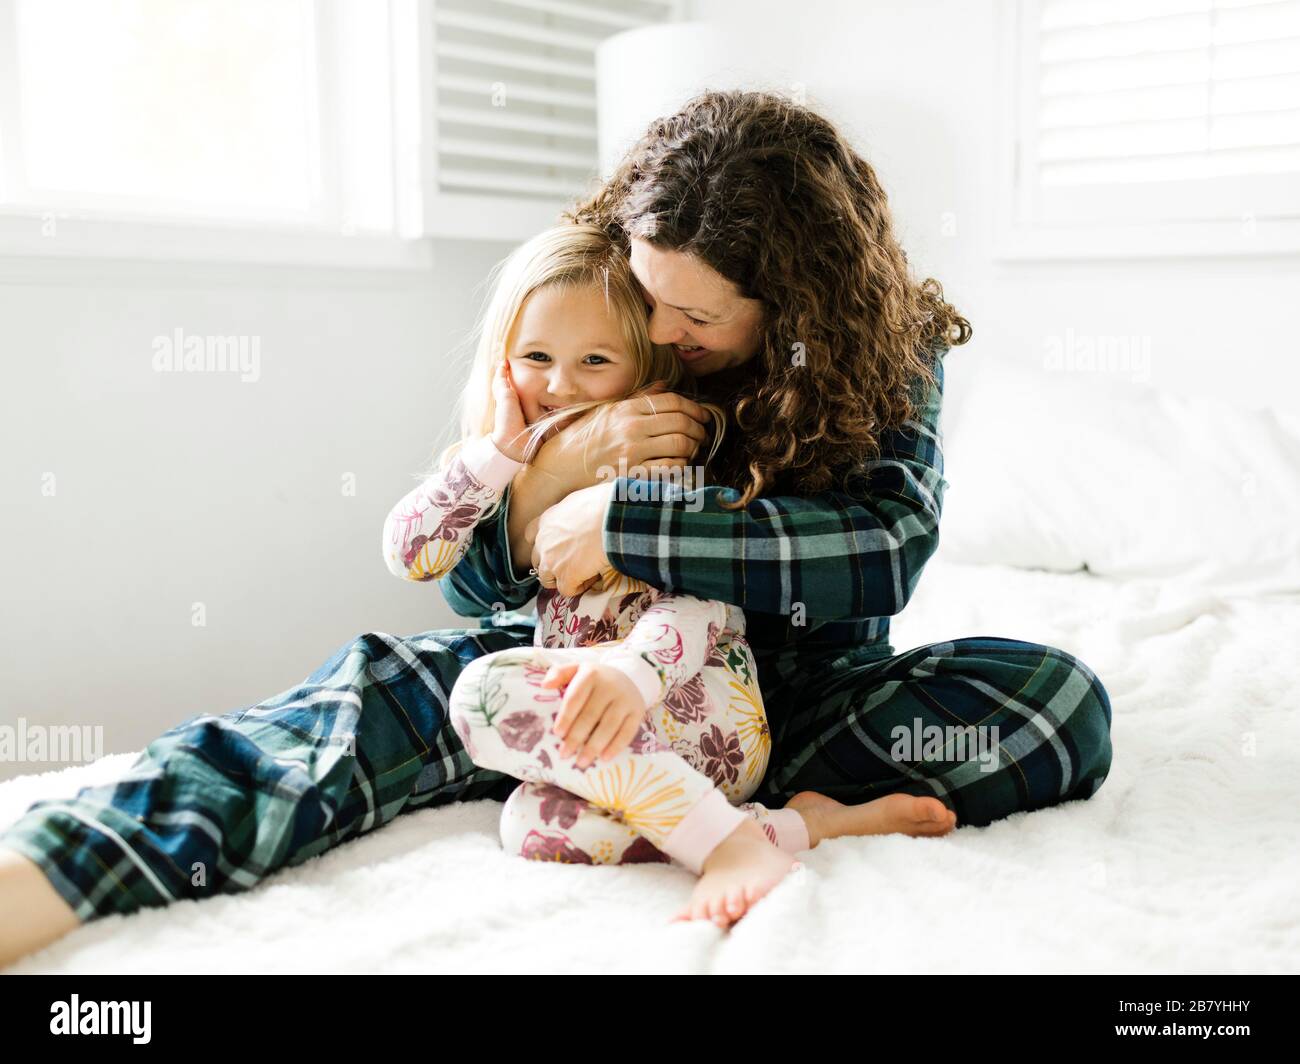 Mother and Daughter hugging on bed Banque D'Images